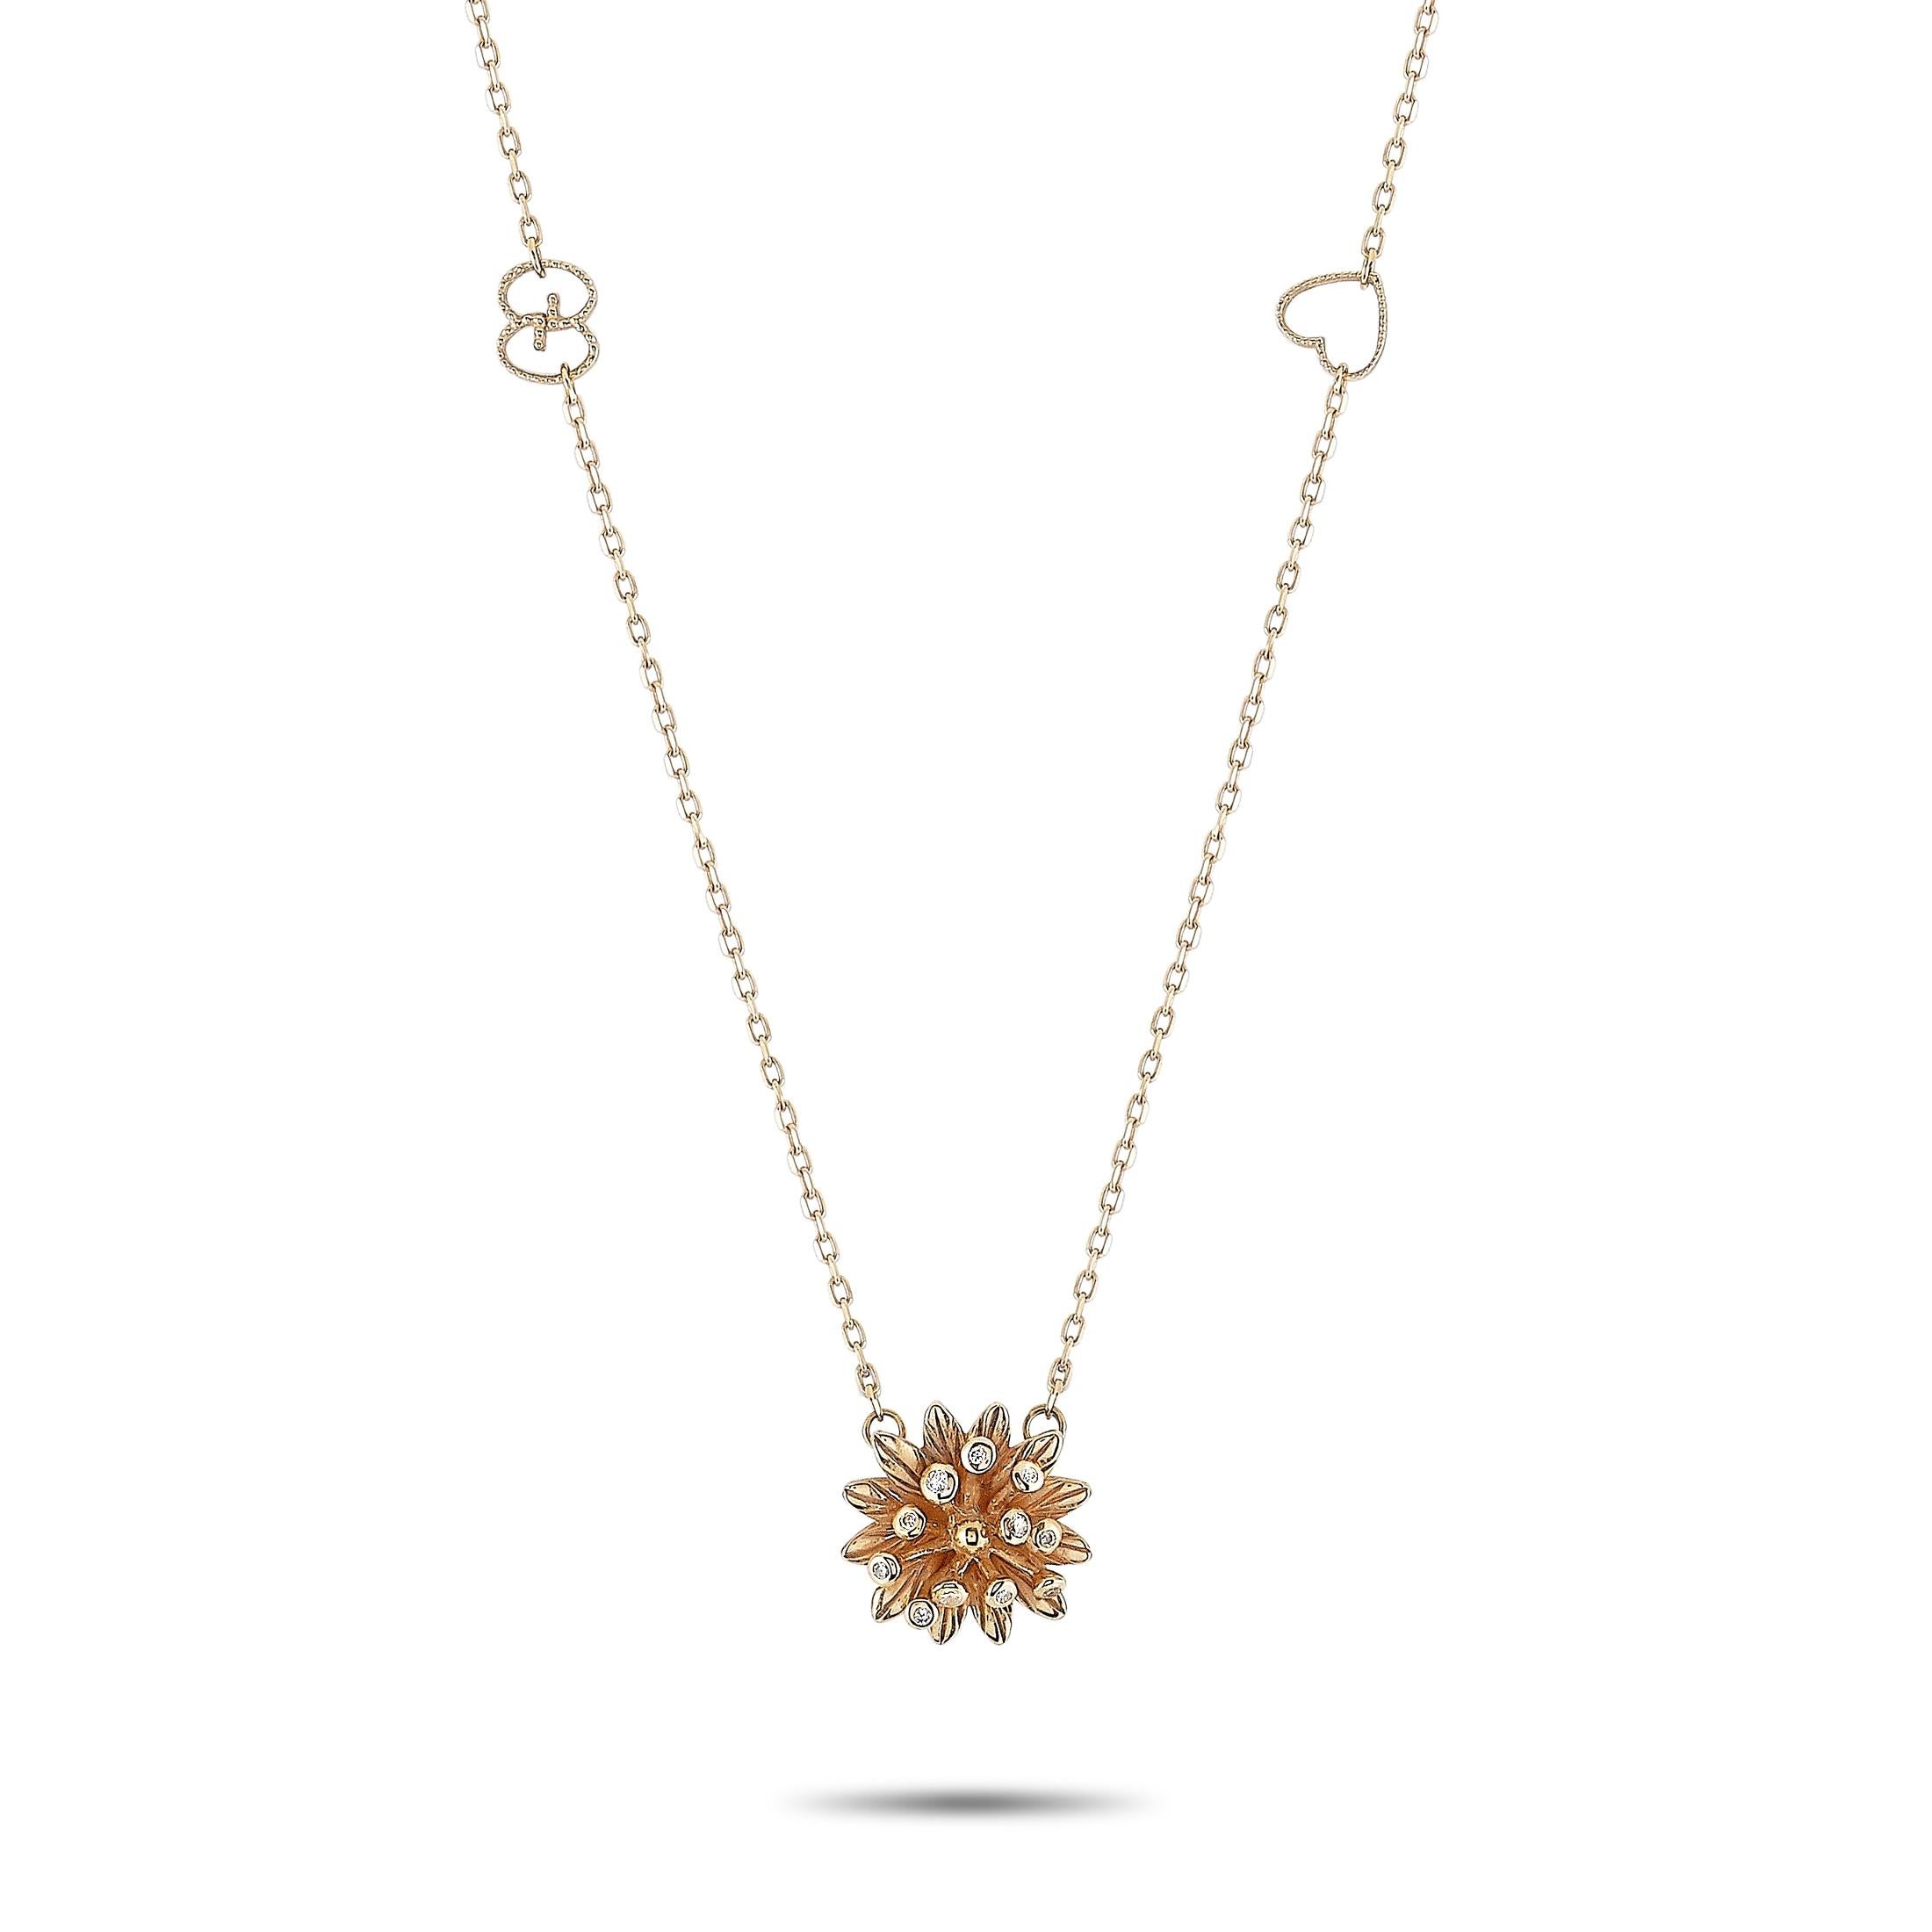 The Gucci “Flora” necklace is made out of 18K rose gold and diamonds that total approximately 0.03 carats. The necklace weighs 4.6 grams, and boasts a 16” chain and a pendant that measures 0.50” in length and 0.50” in width.
 
 This jewelry piece is